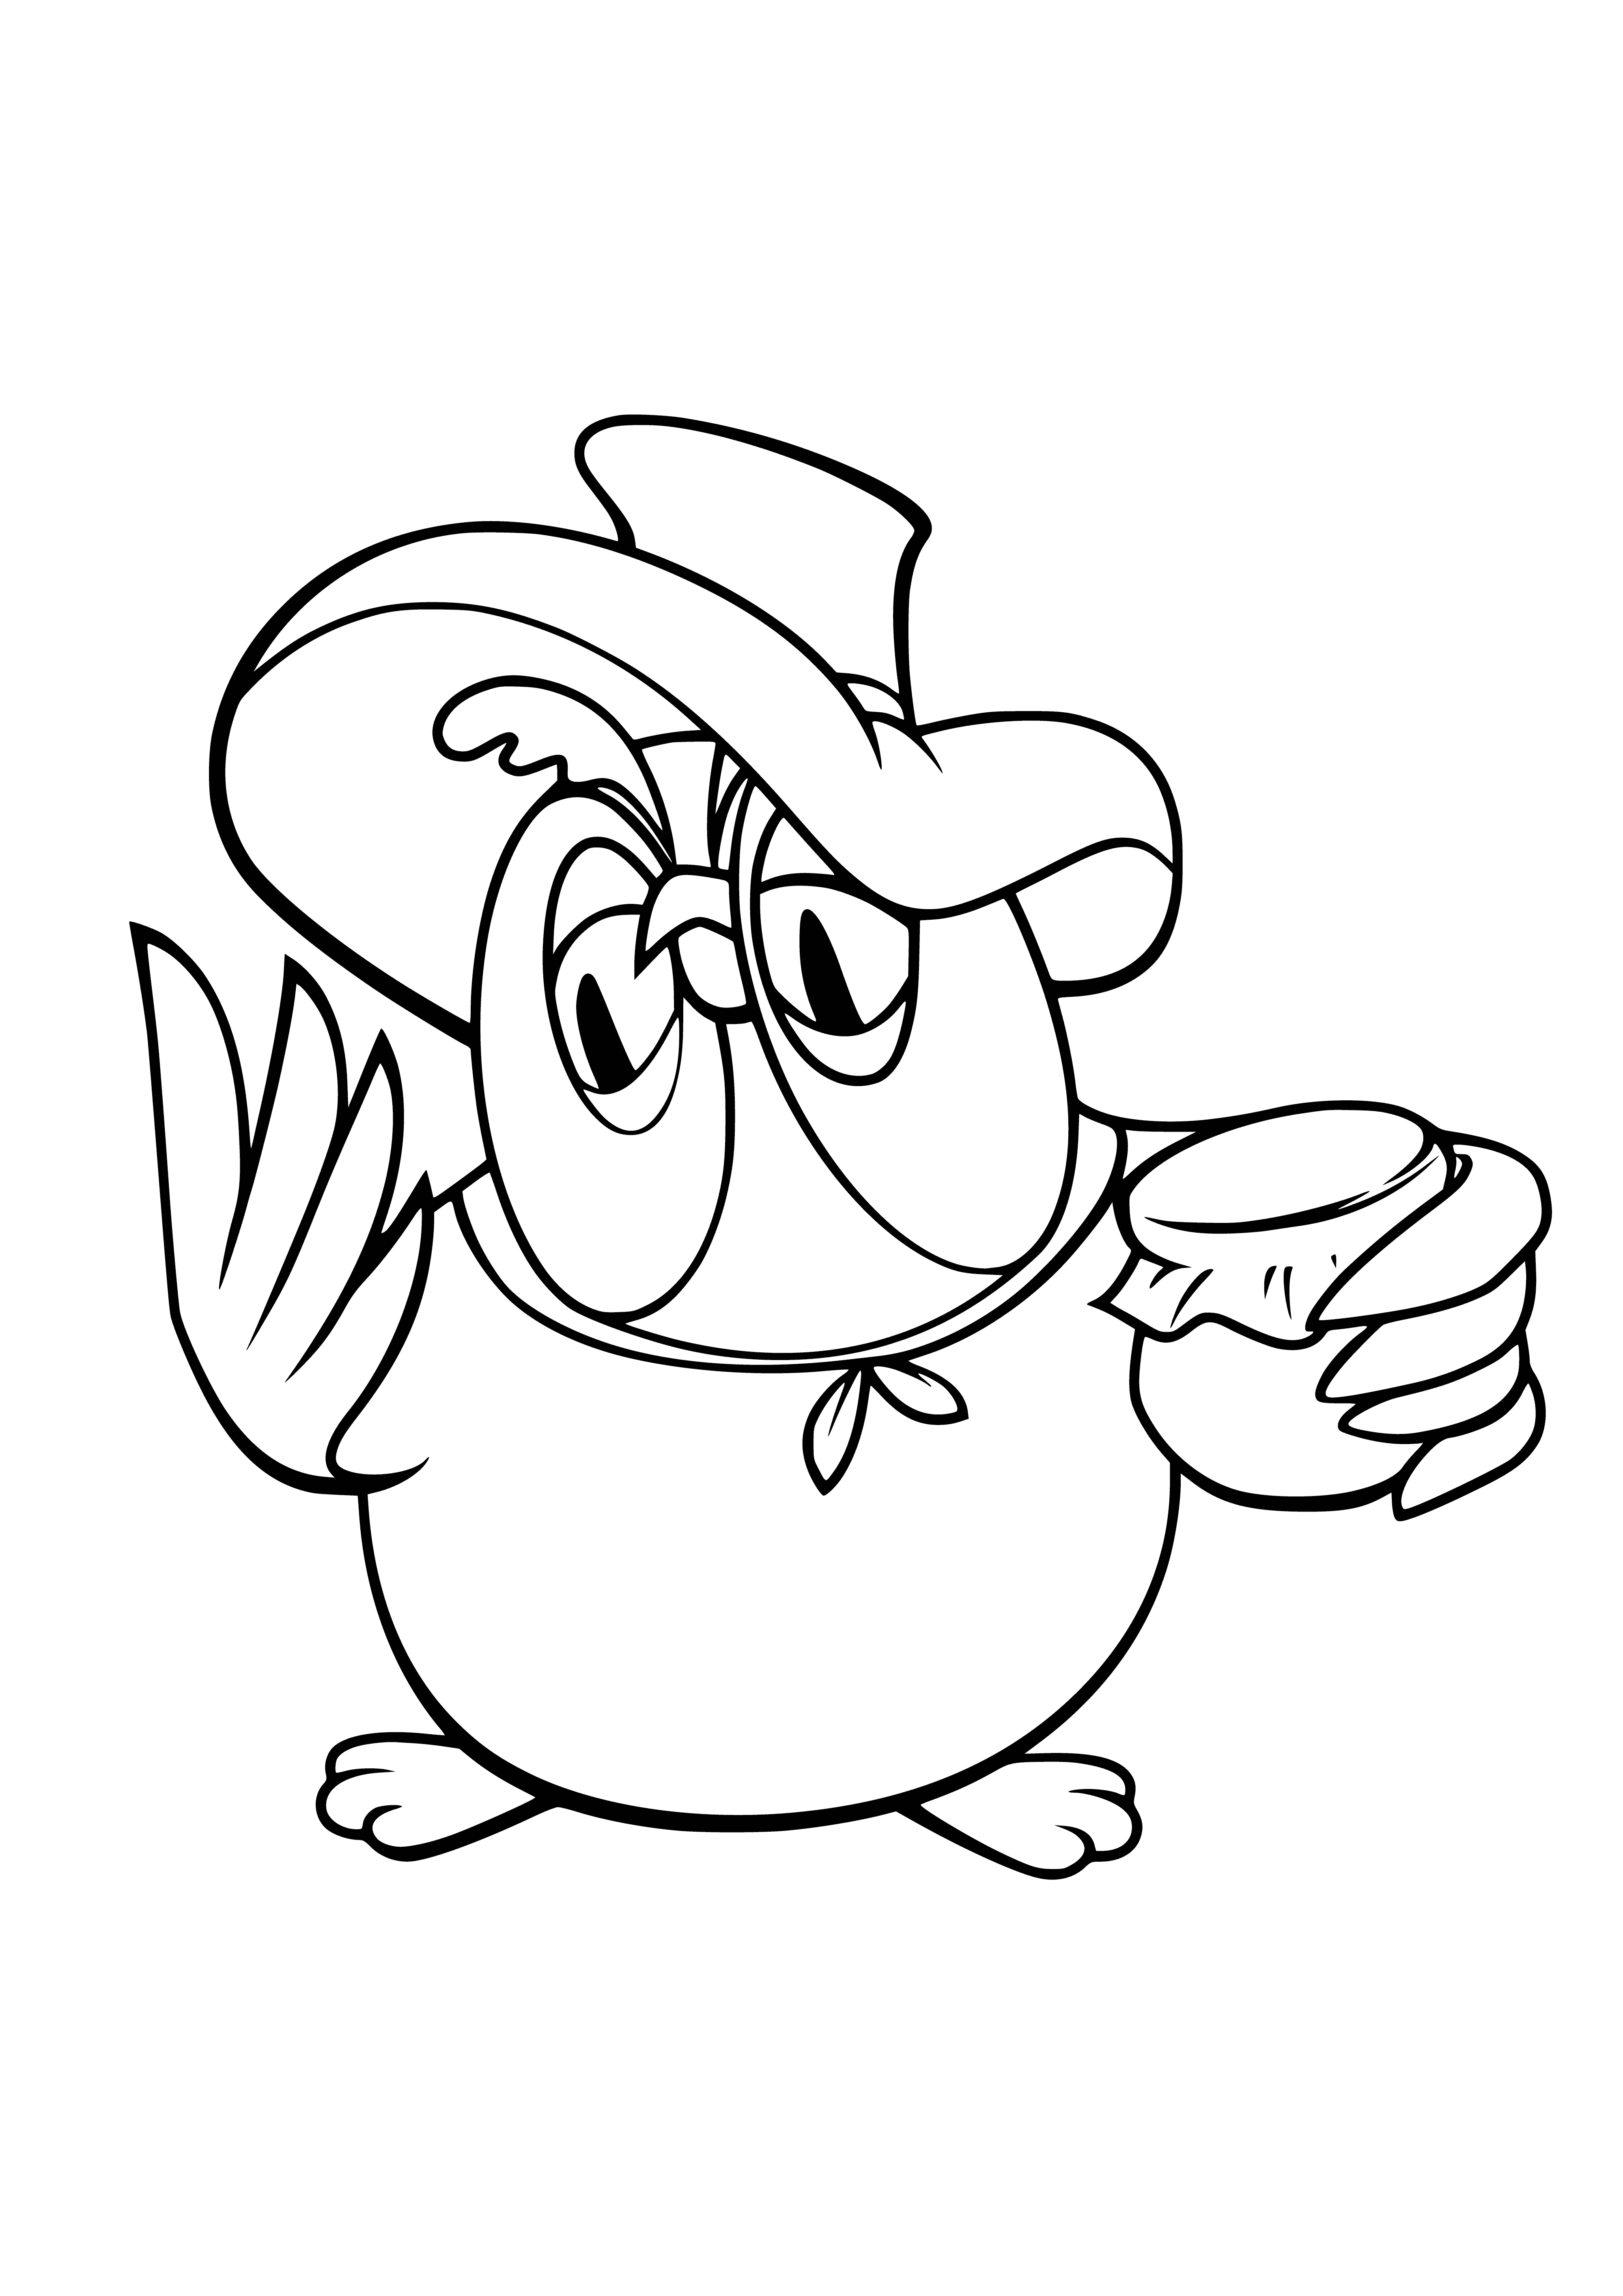 A Wise Owl from Winnie the Pooh is holding a book and wearing a blue scarf. #WinniethePooh #ColoringPage